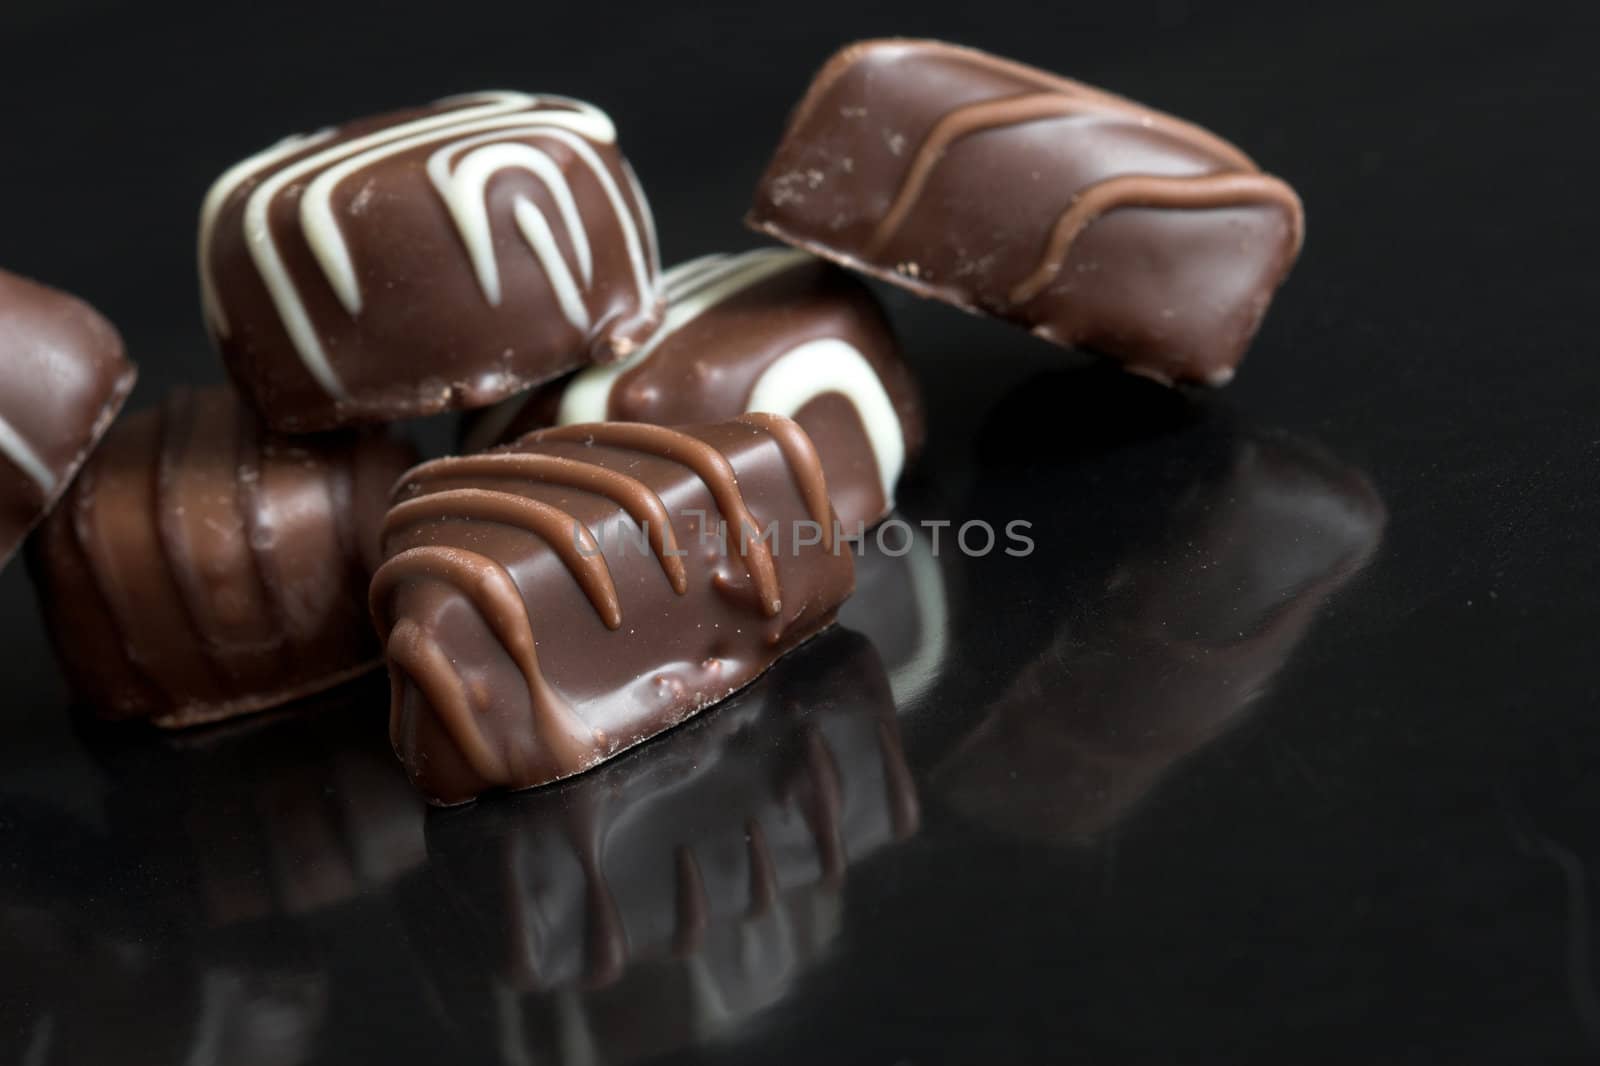 Delicious chocolates lying on black background with reflection